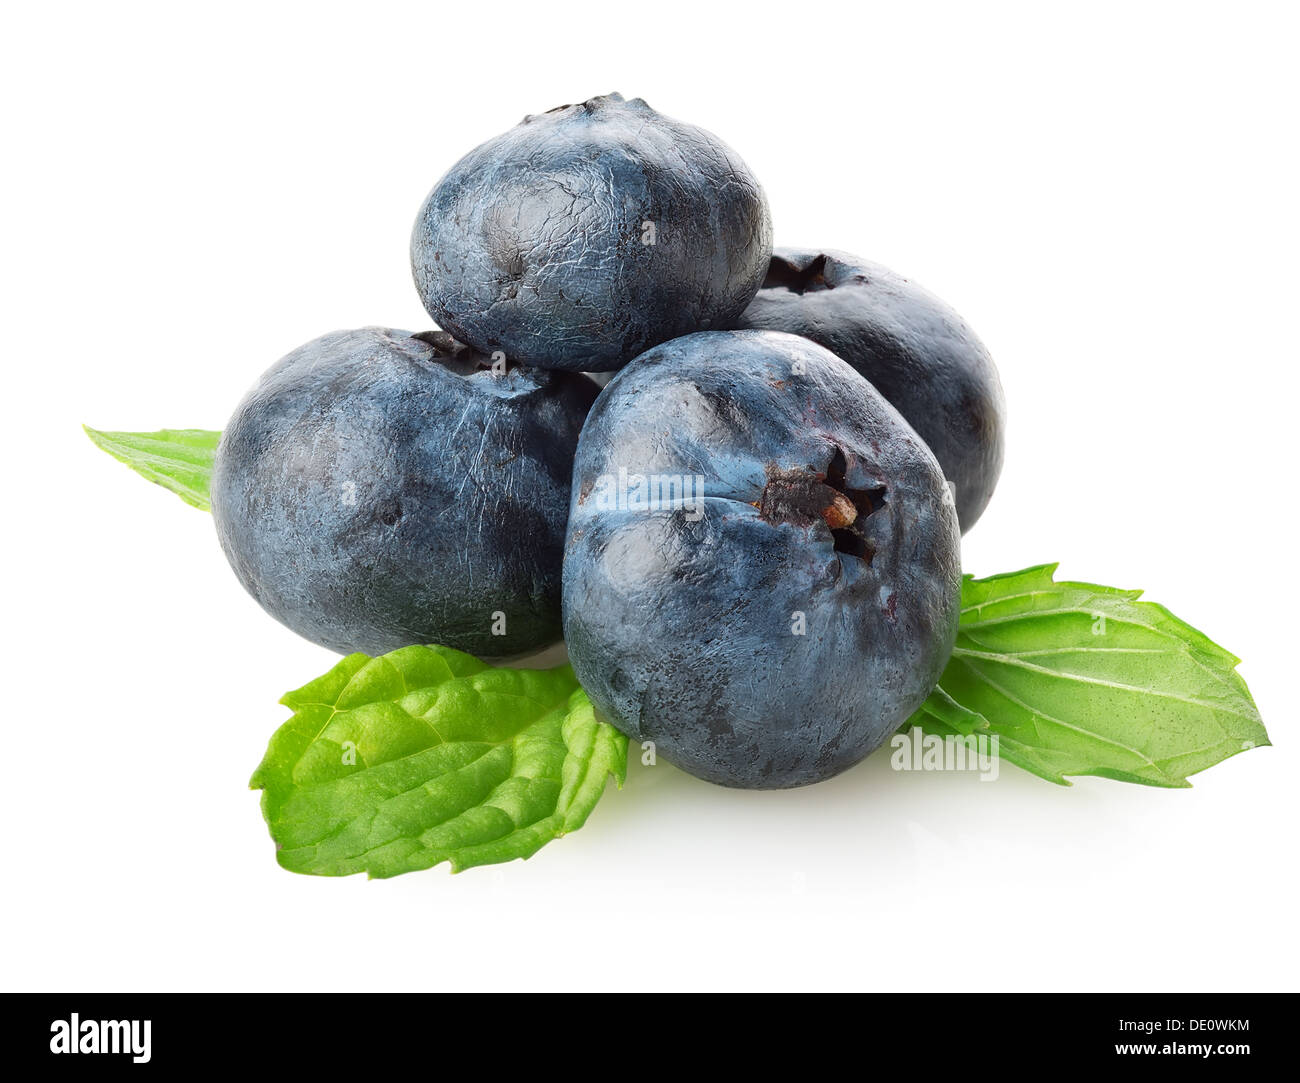 Blueberry with green leaves isolated on a white background Stock Photo